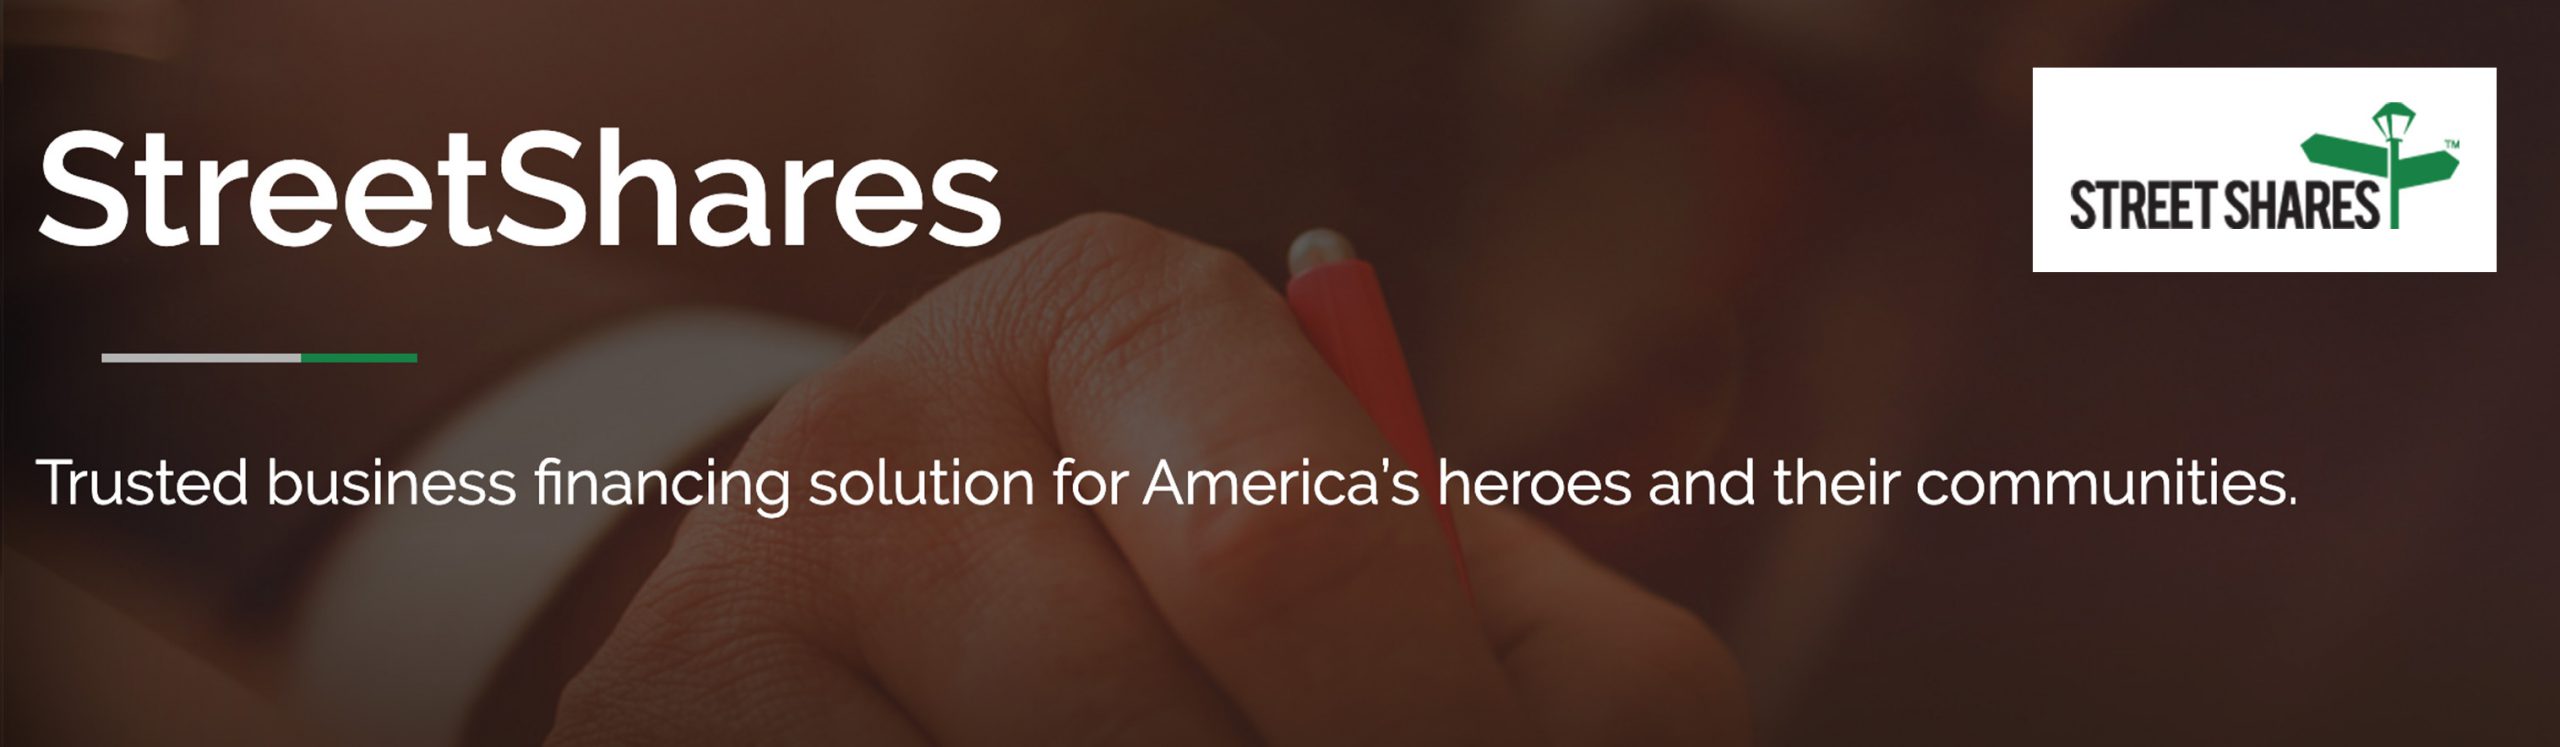 Trusted business financing solution for America’s heroes and their communities.